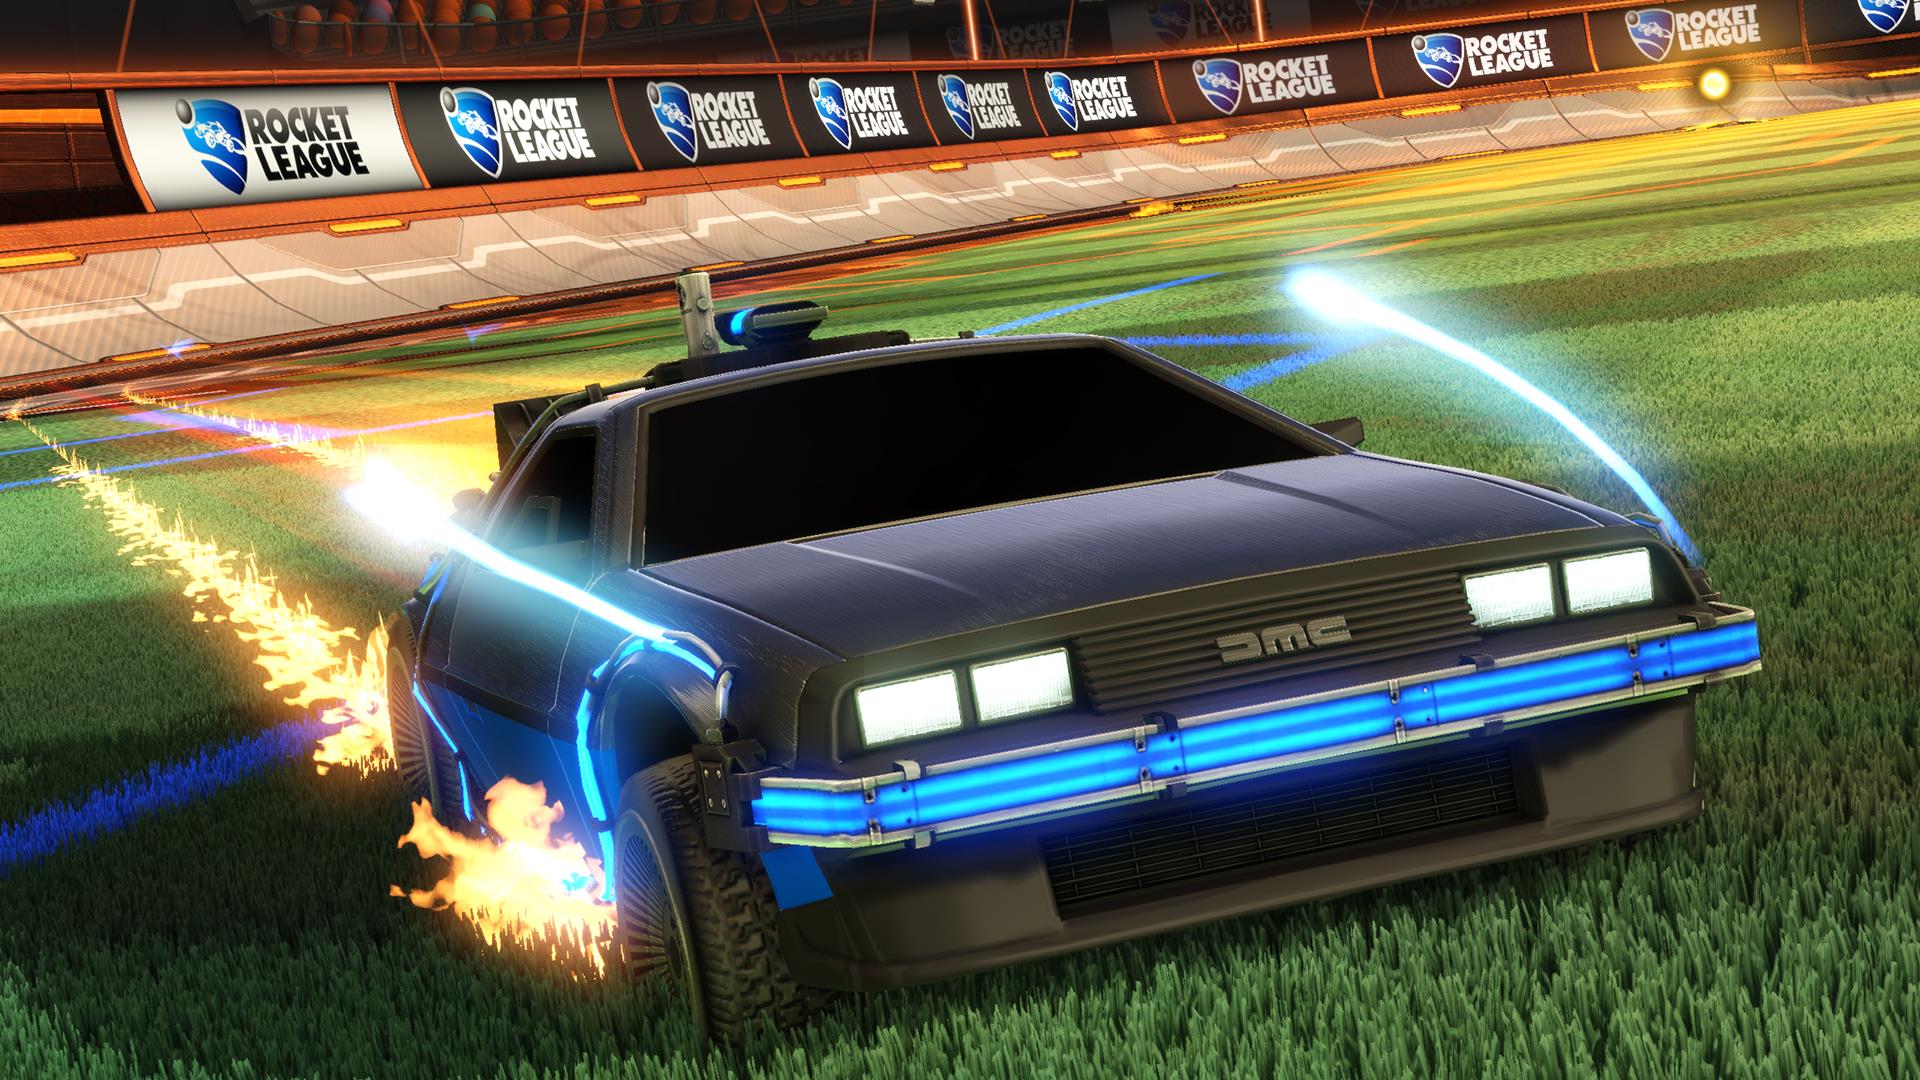 Image for Rocket League is getting Back to the Future's DeLorean Time Machine